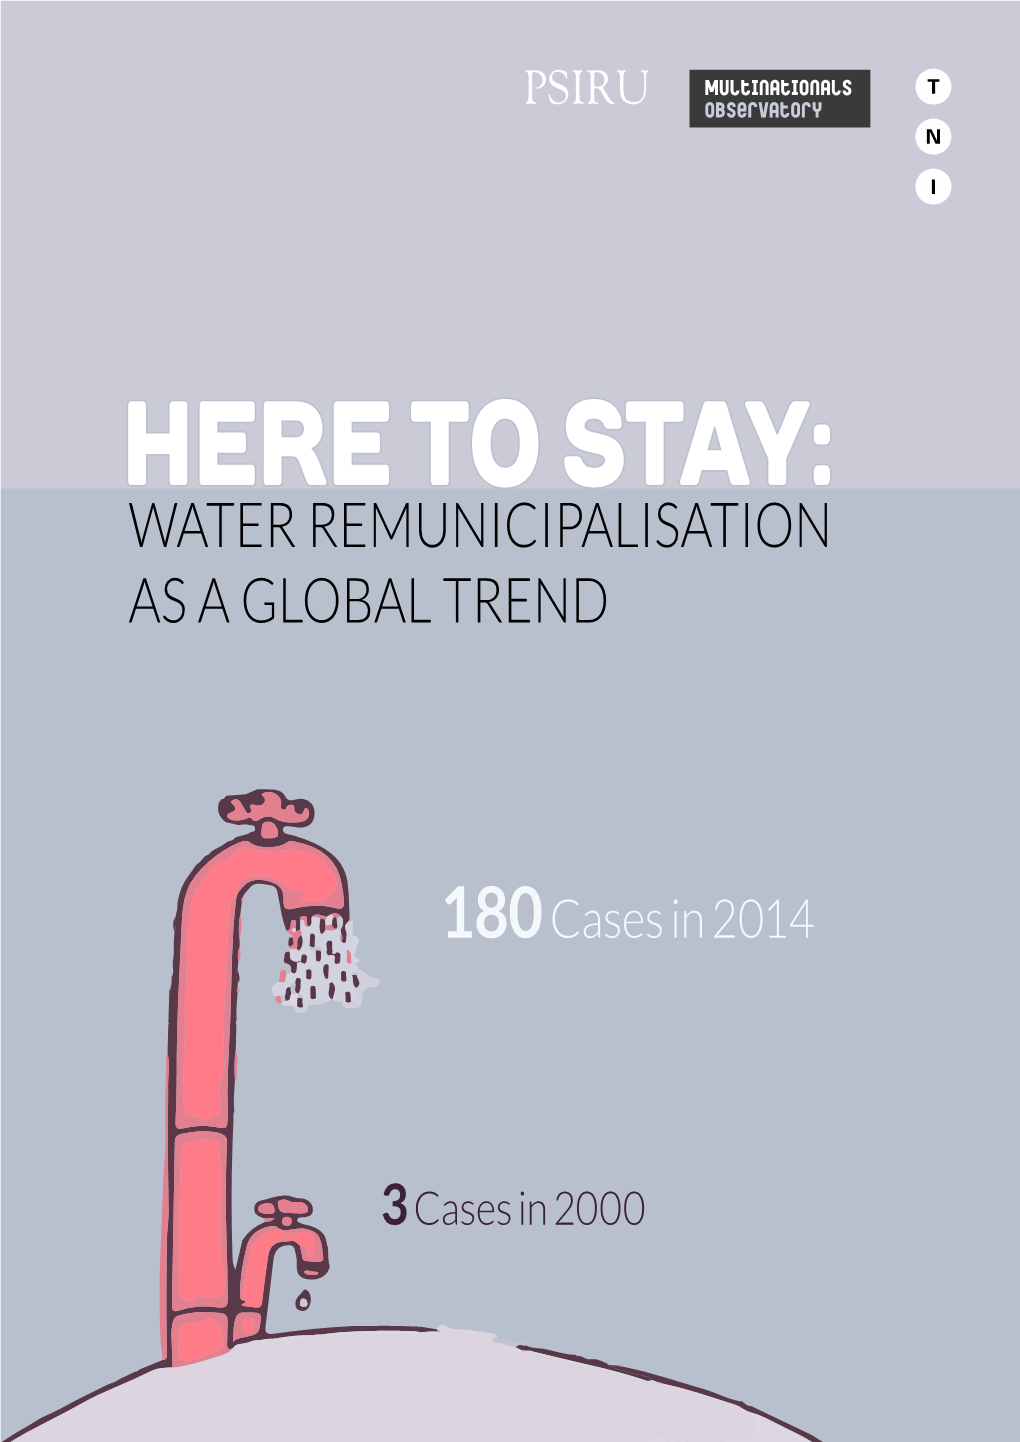 To Stay: Water Remunicipalisation As a Global Trend